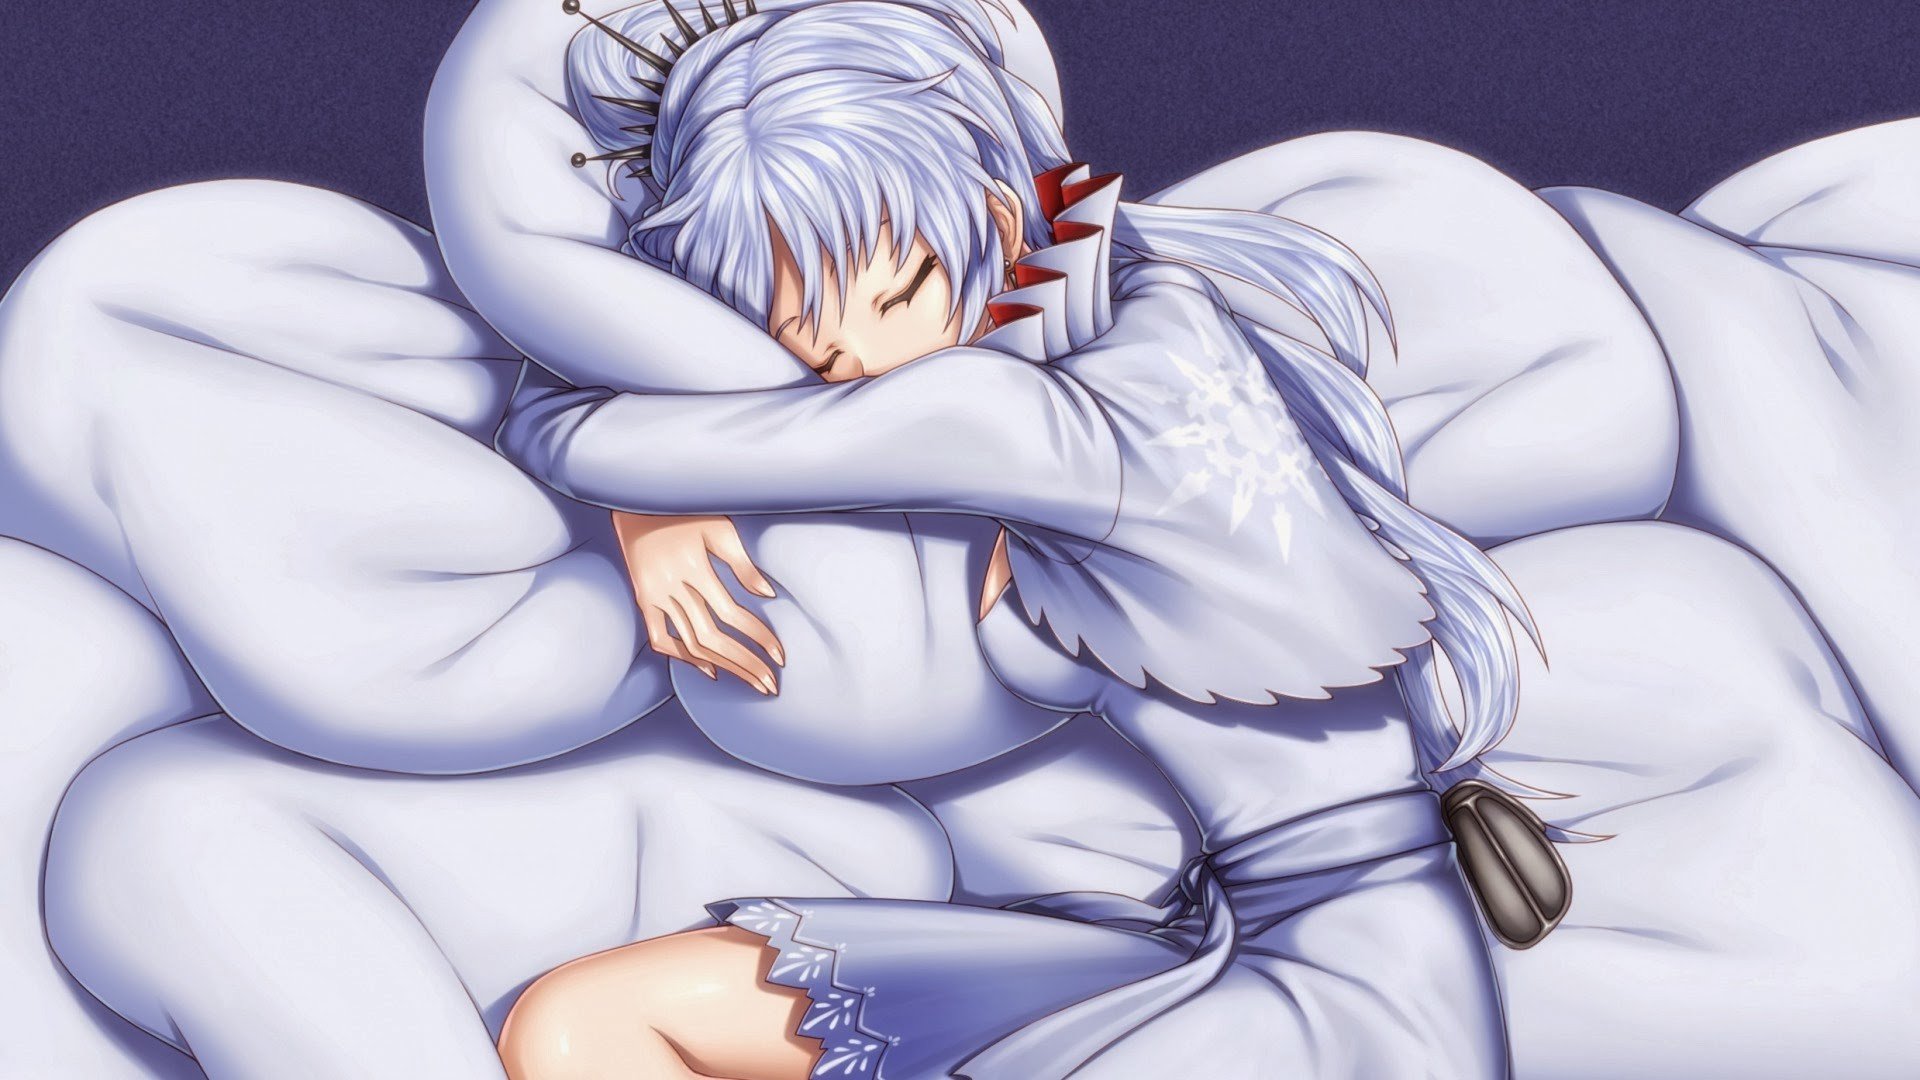 anime, RWBY, Weiss Schnee Wallpapers HD / Desktop and Mobile Backgrounds.